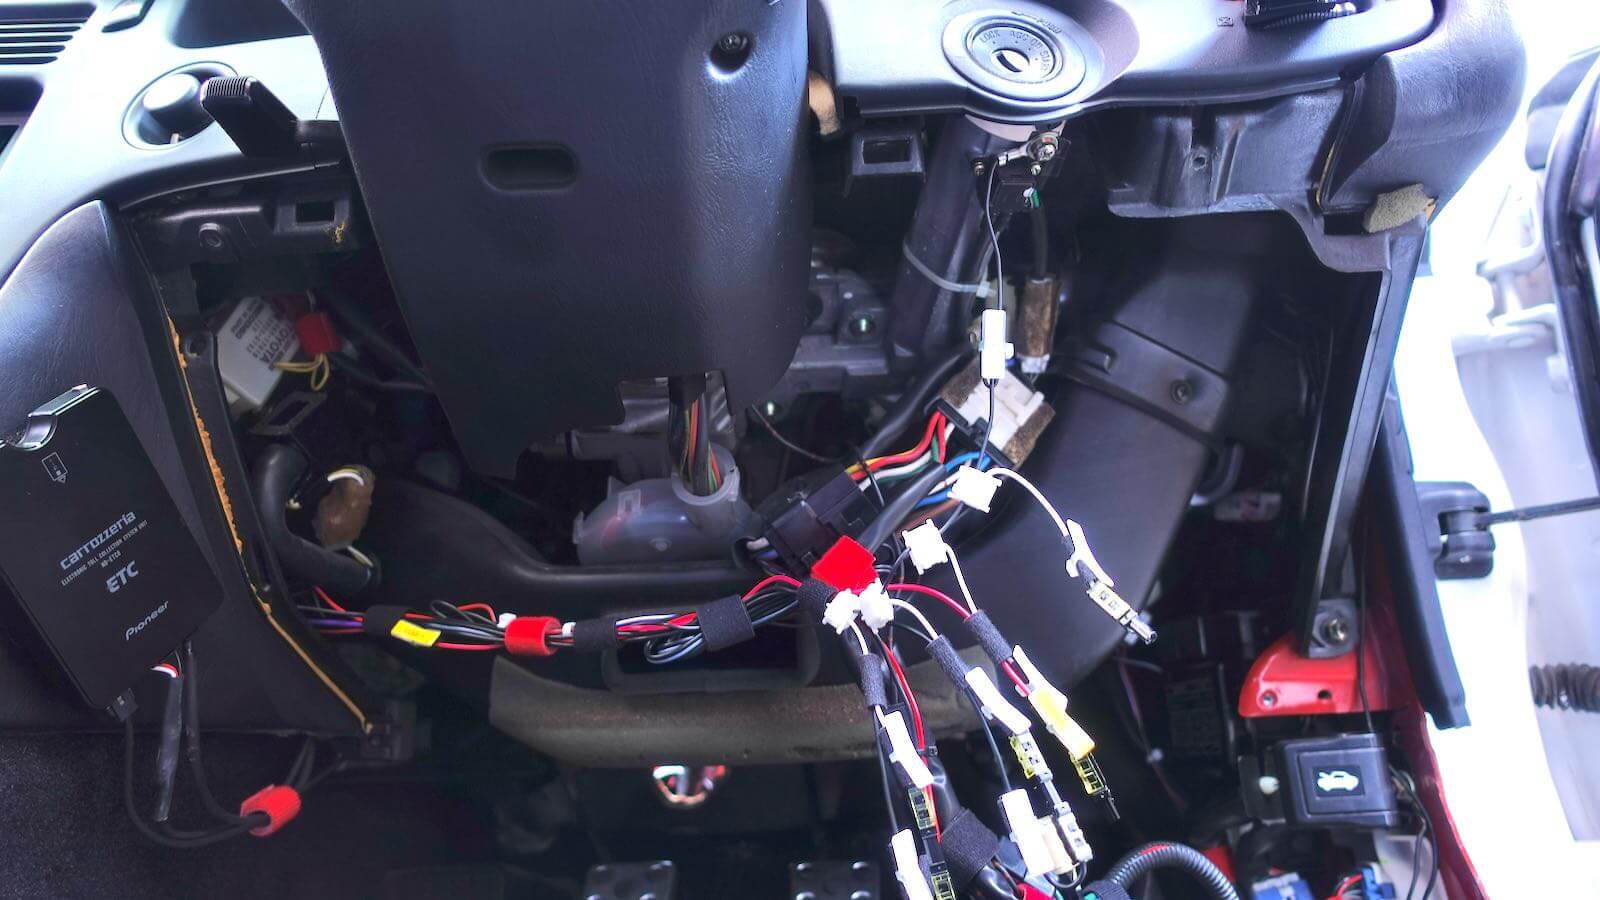 Crawl the wiring cable under the MR2 steering wheel